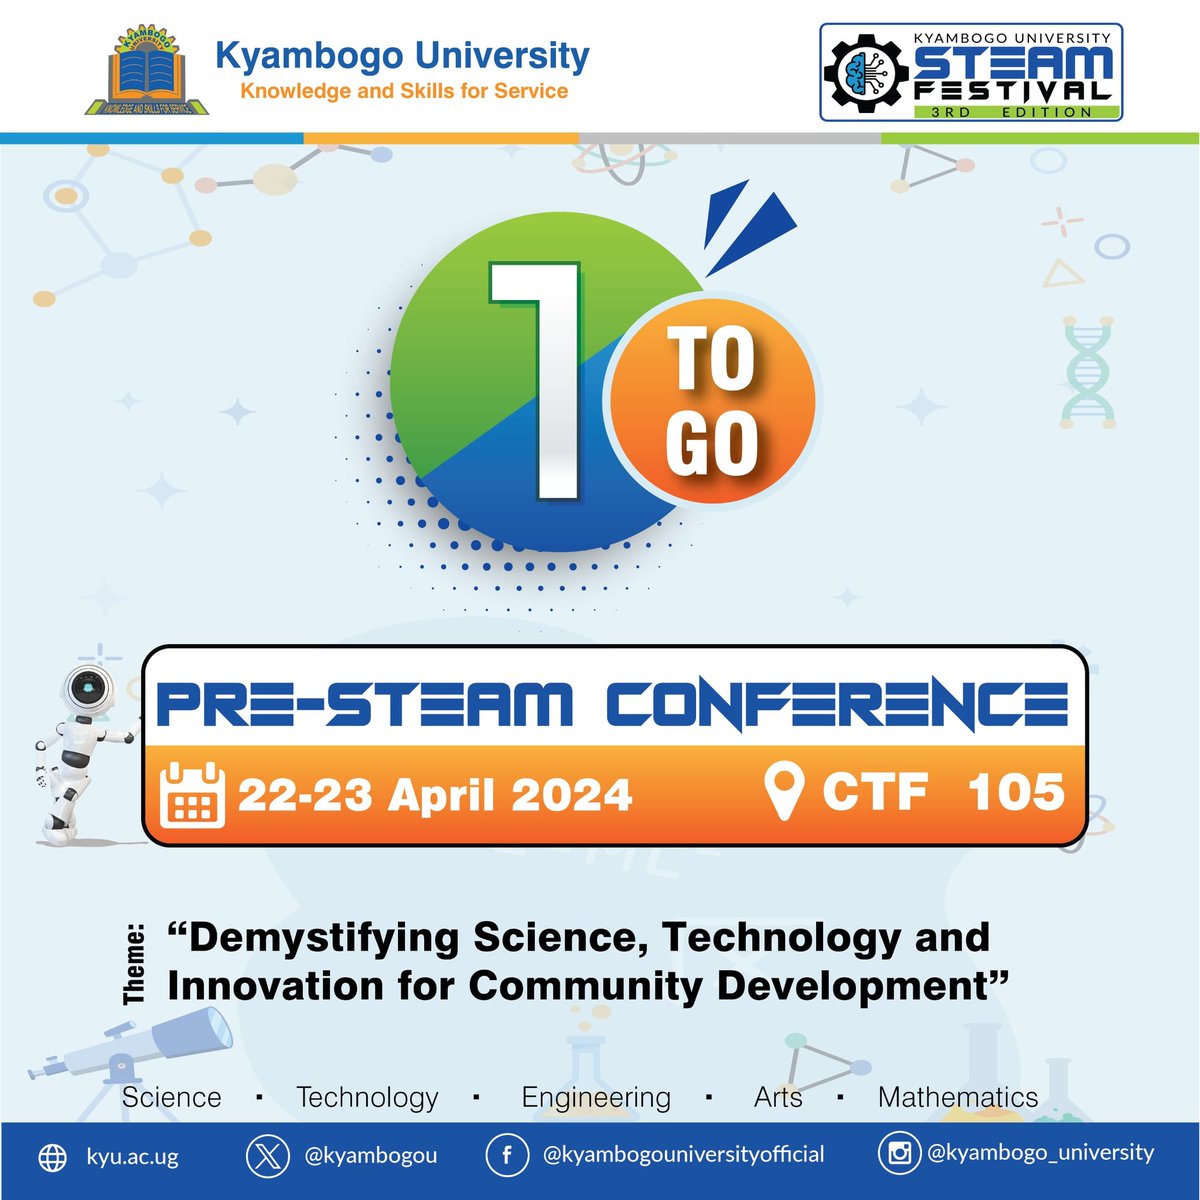 STEAM 3rd edition will start on Wednesday, 24th to 26th April 2024. There will be a pre-STEAM conference starting on Monday, 22nd to Tuesday, 23rd April 2024, at CTF auditorium 105. Come and share knowledge